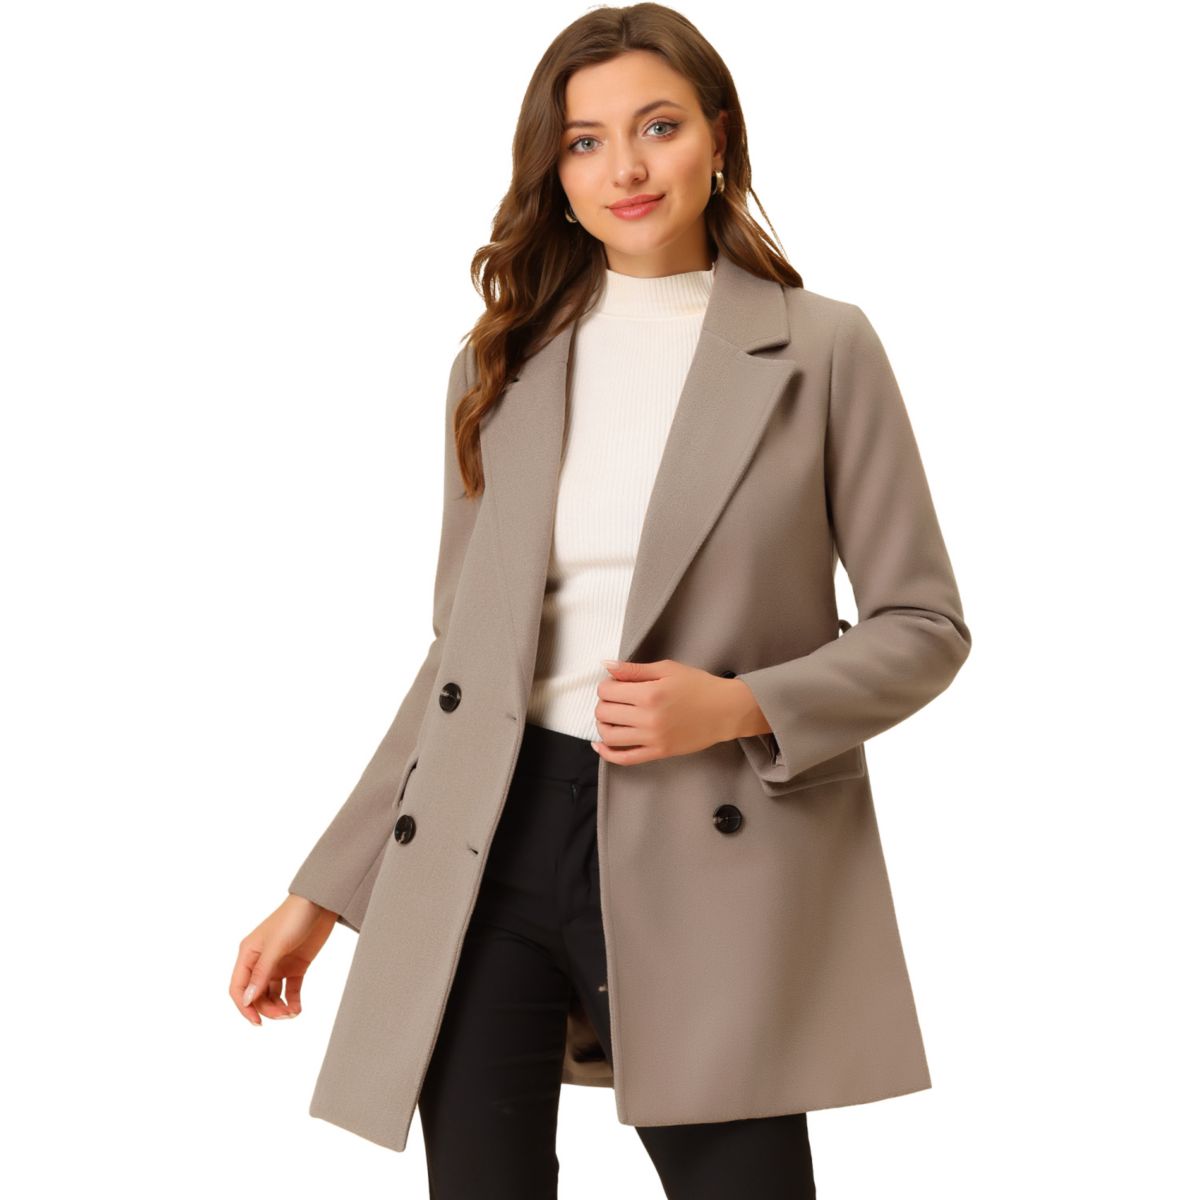 Women's Notch Lapel Double Breasted Belted Mid Length Trenchcoat ALLEGRA K